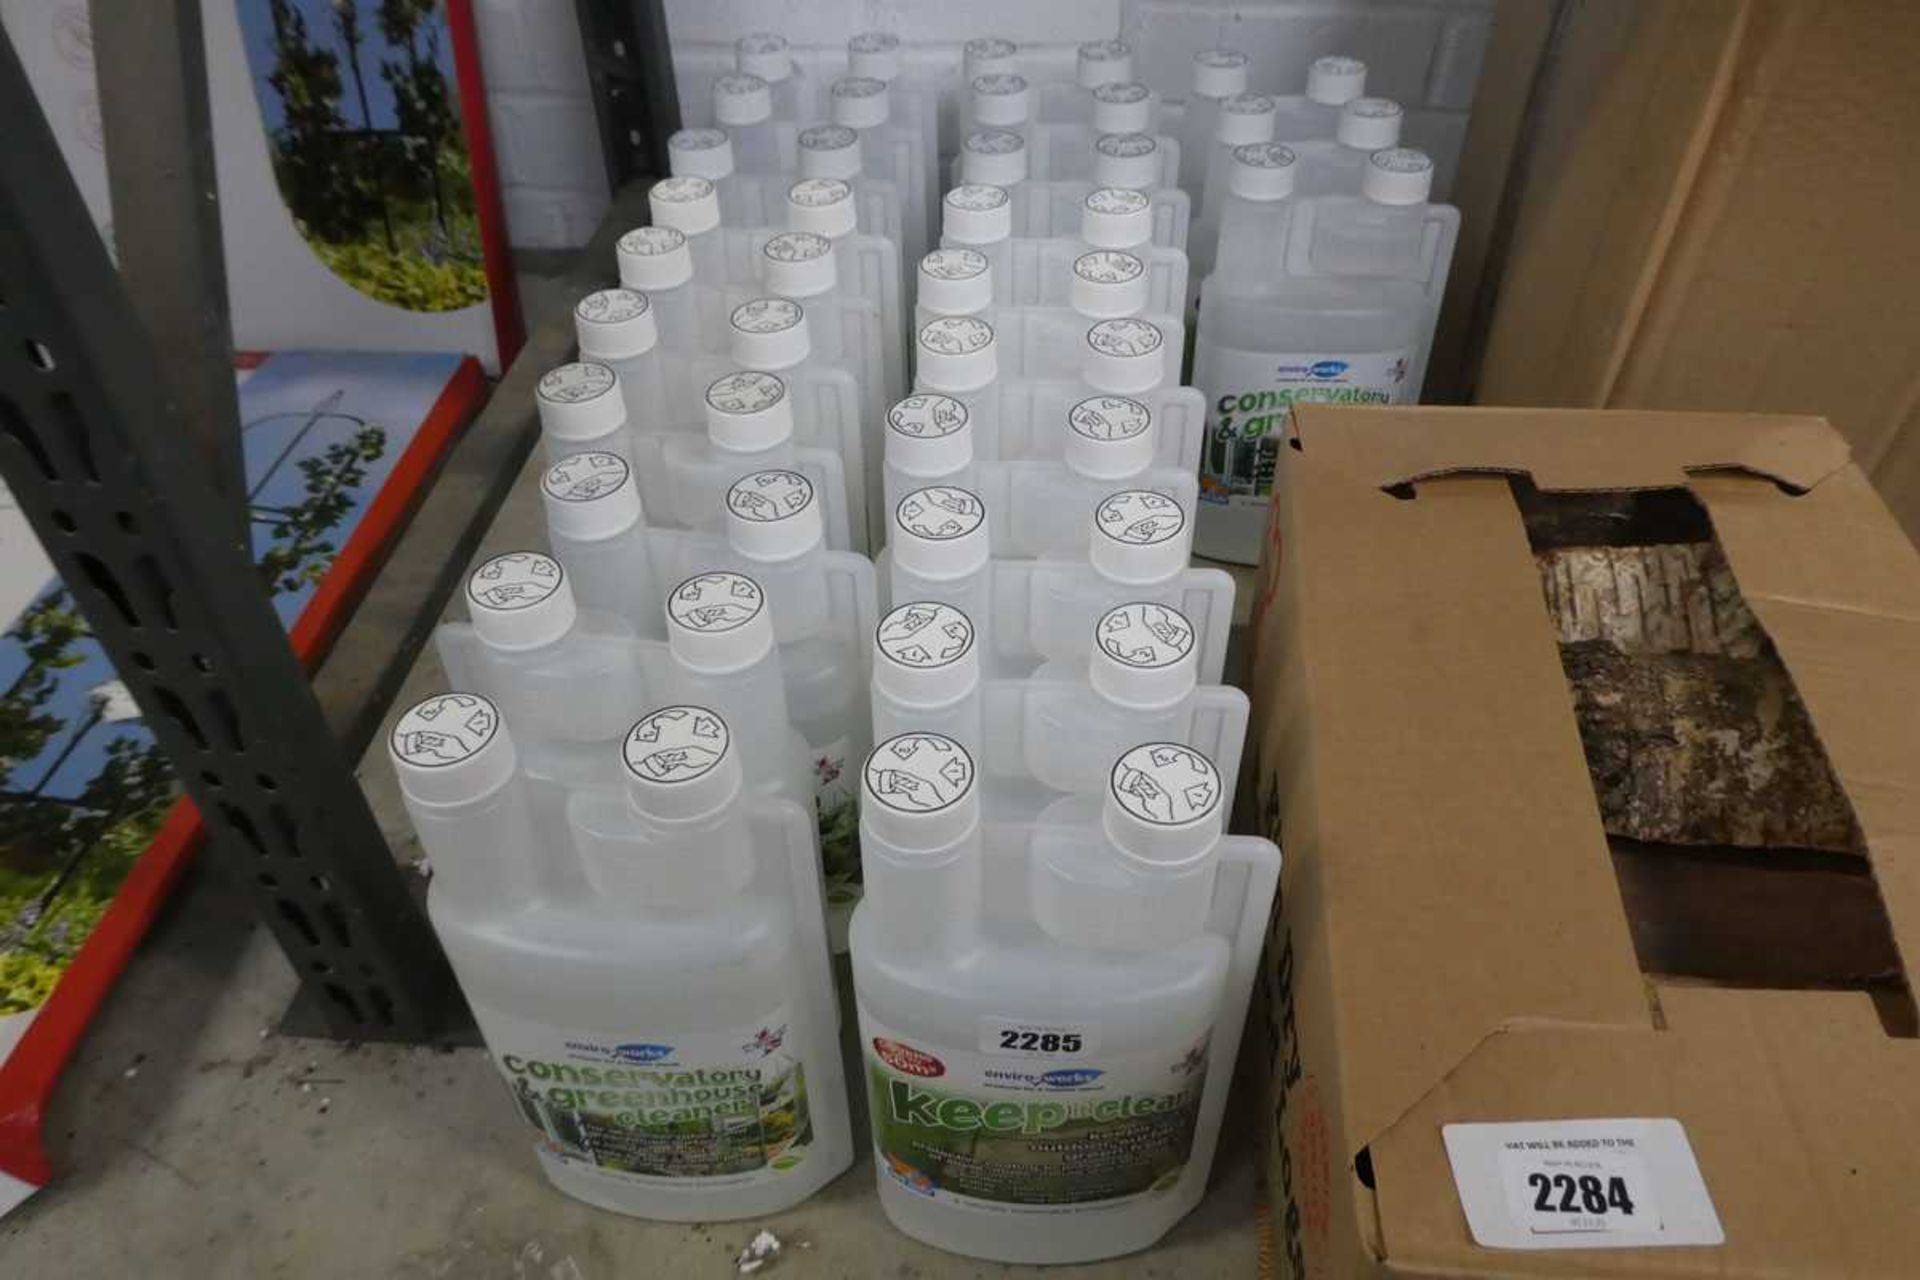 23 bottles of Path, Conservatory and Greenhouse cleaner